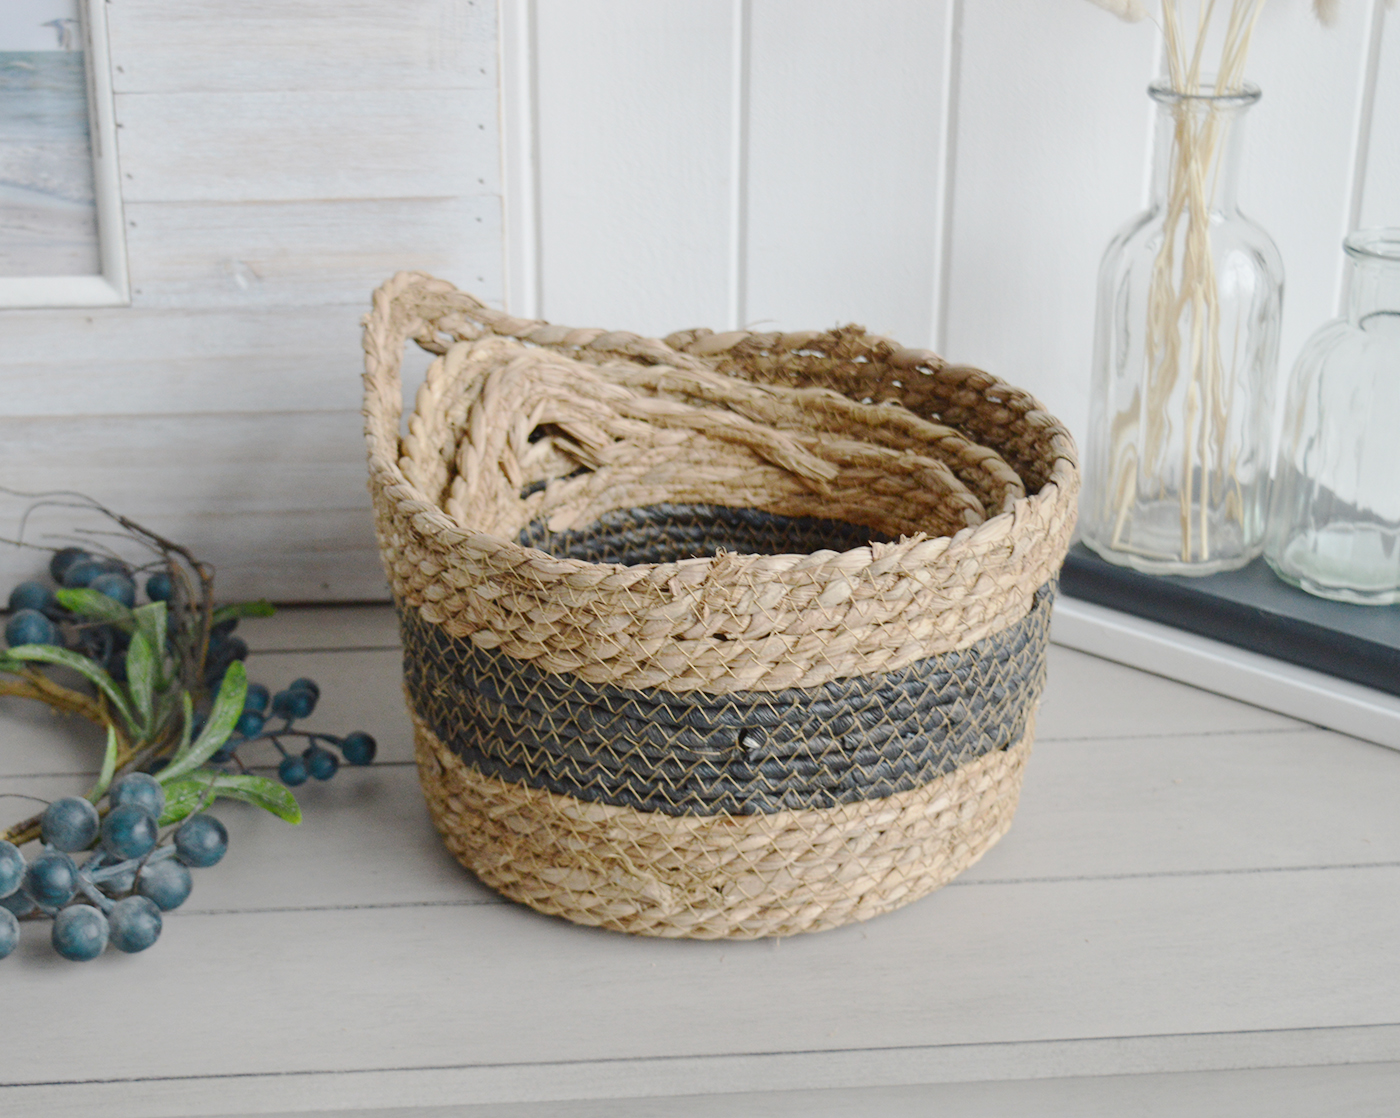 Newington Set of 3 Baskets with handle for everyday storage from The White Lighthouse Furniture and Home Interiors for New England, country, coastal and city homes for hallway, living room, bedroom and bathroom